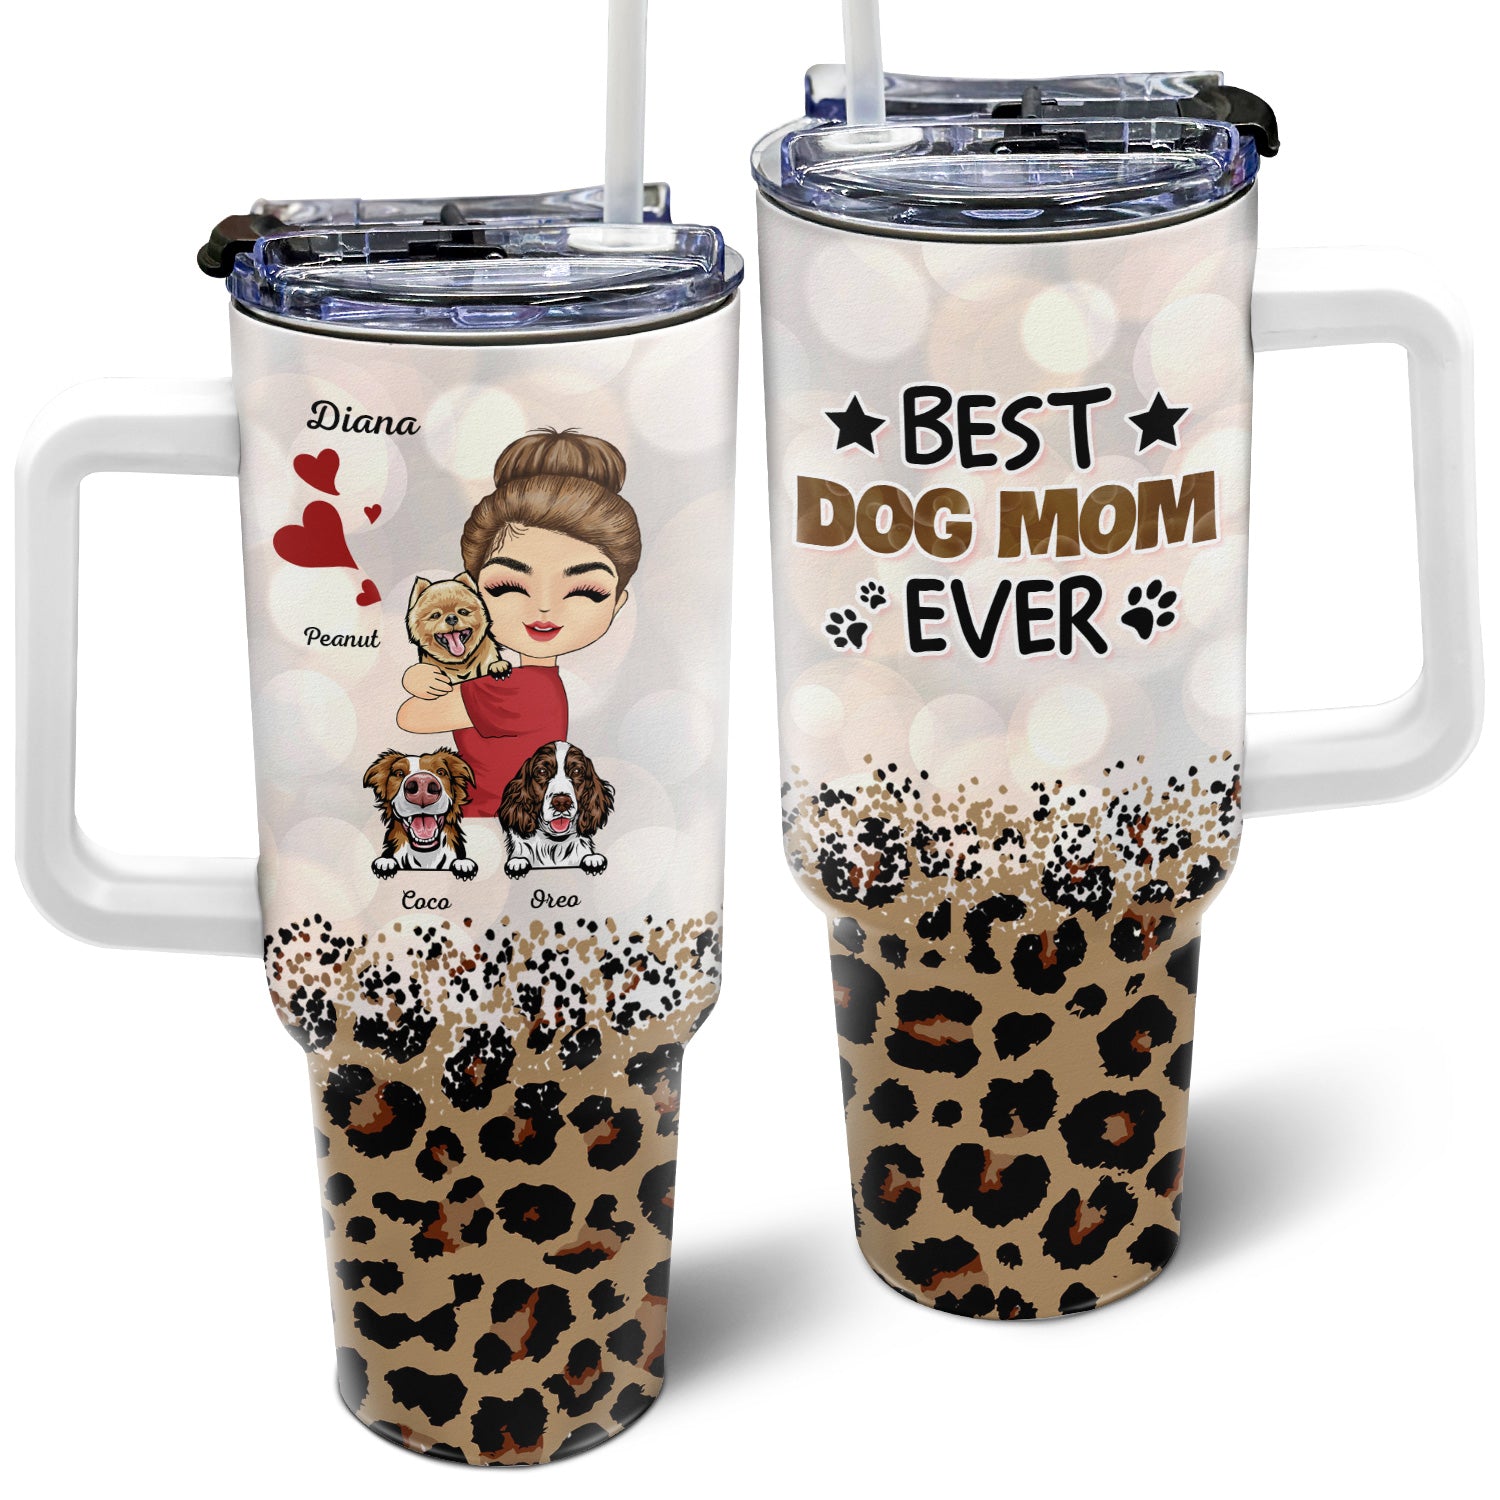 Best Dog Mom Ever - Gift For Dog Mom, Dog Lovers - Personalized 40oz Tumbler With Straw